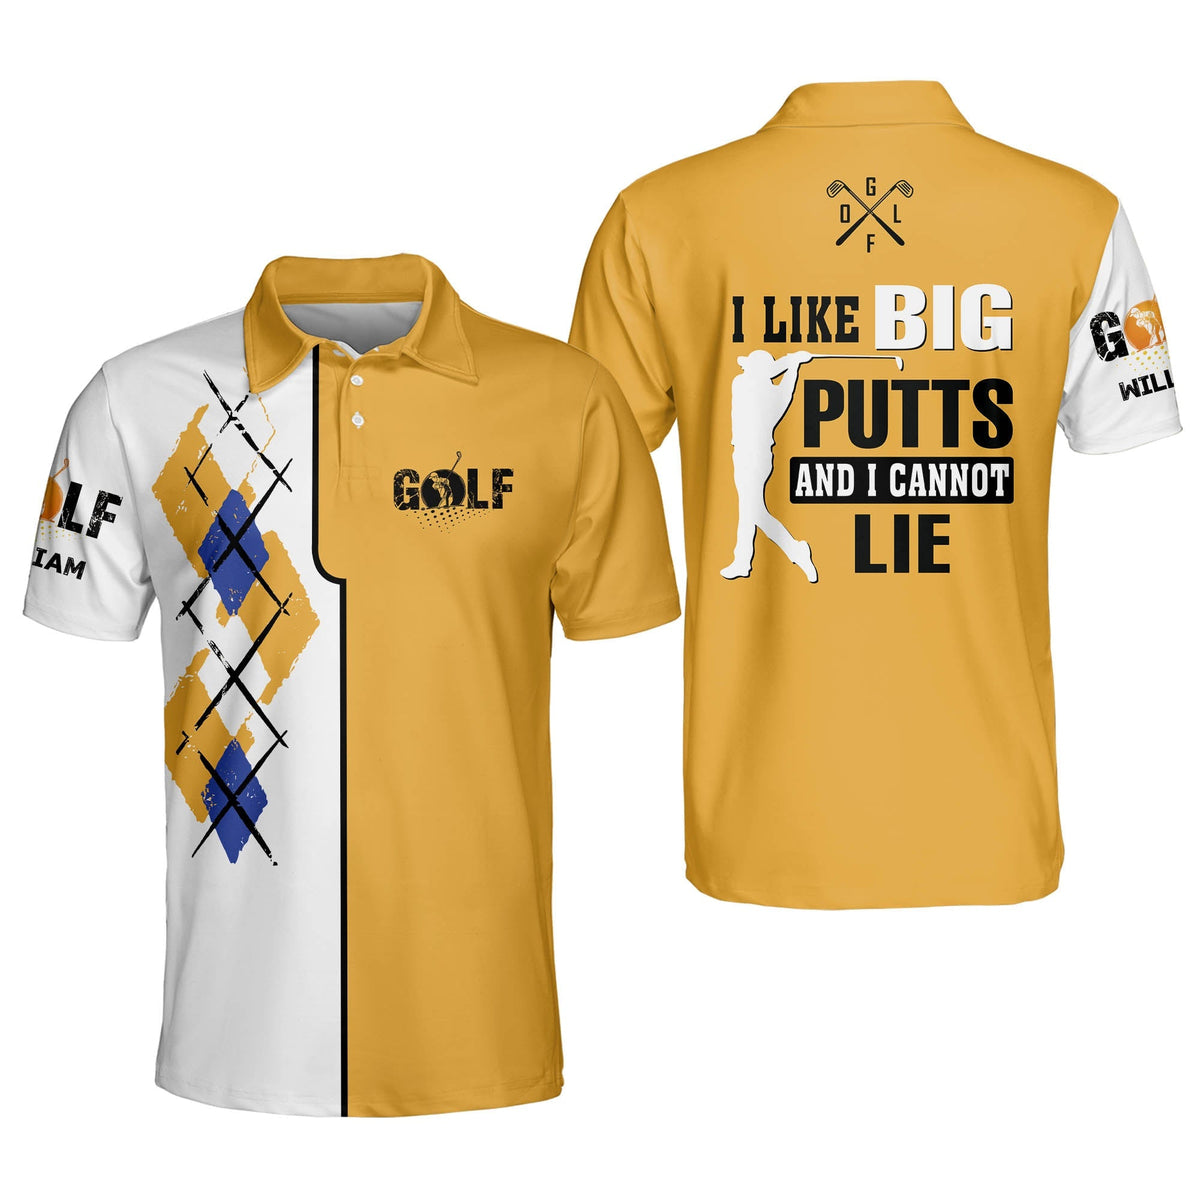 Lasfour Personalized Funny Golf Shirts for Men, I Like Big Putts And I ...